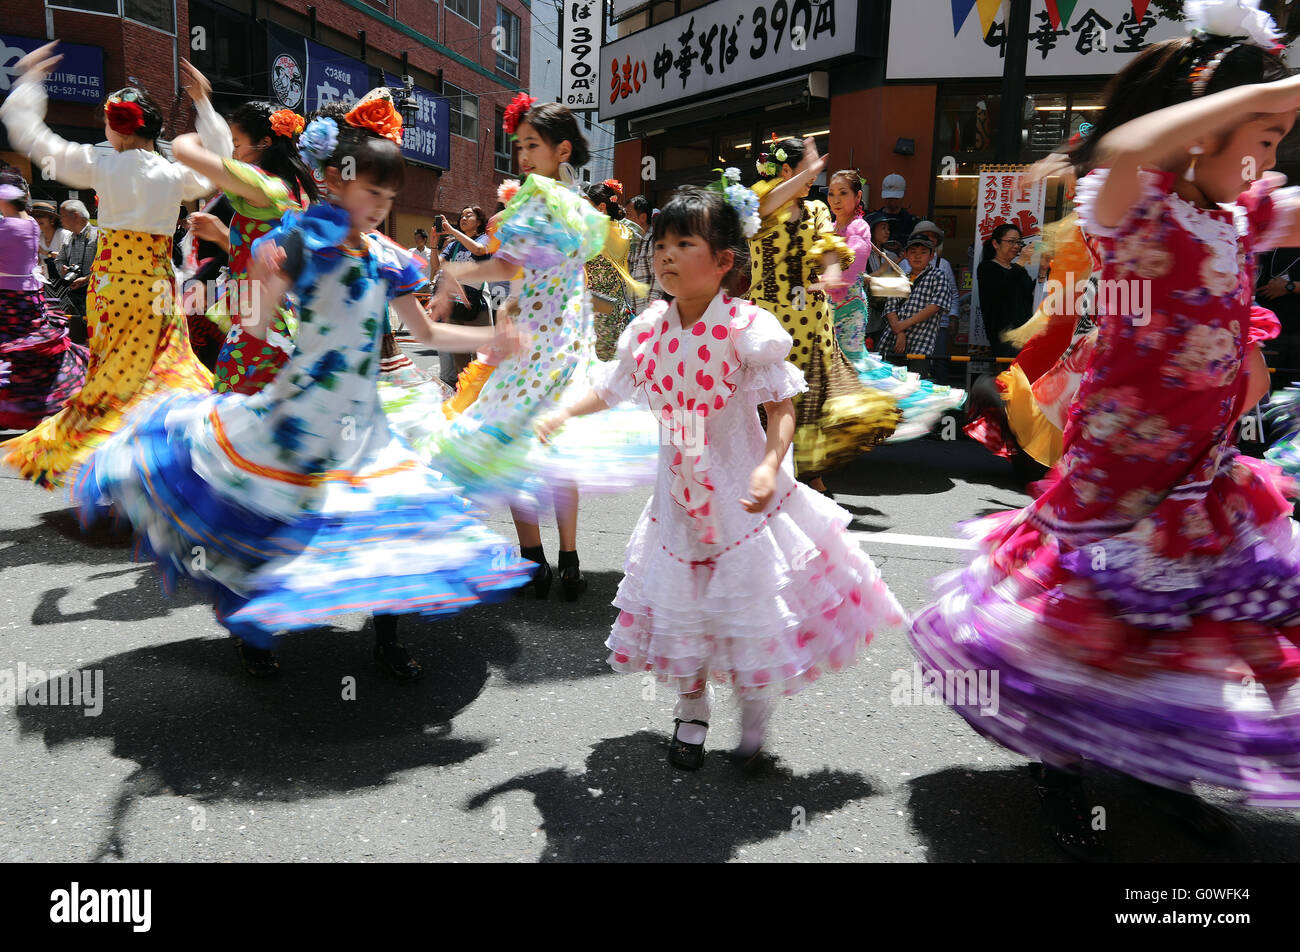 Tokyo, Japan. 4th May, 2016. Japan's flamenco lovers in colorful dresses perform SevillAnnas dancing on a street as part of the 'Tachikawa Flamenco' festival in Tokyo on Wednesday, May 4, 2016. Some 500 dancers enjoy street framenco dancing at an annual festival event in suburban Tokyo. © Yoshio Tsunoda/AFLO/Alamy Live News Stock Photo